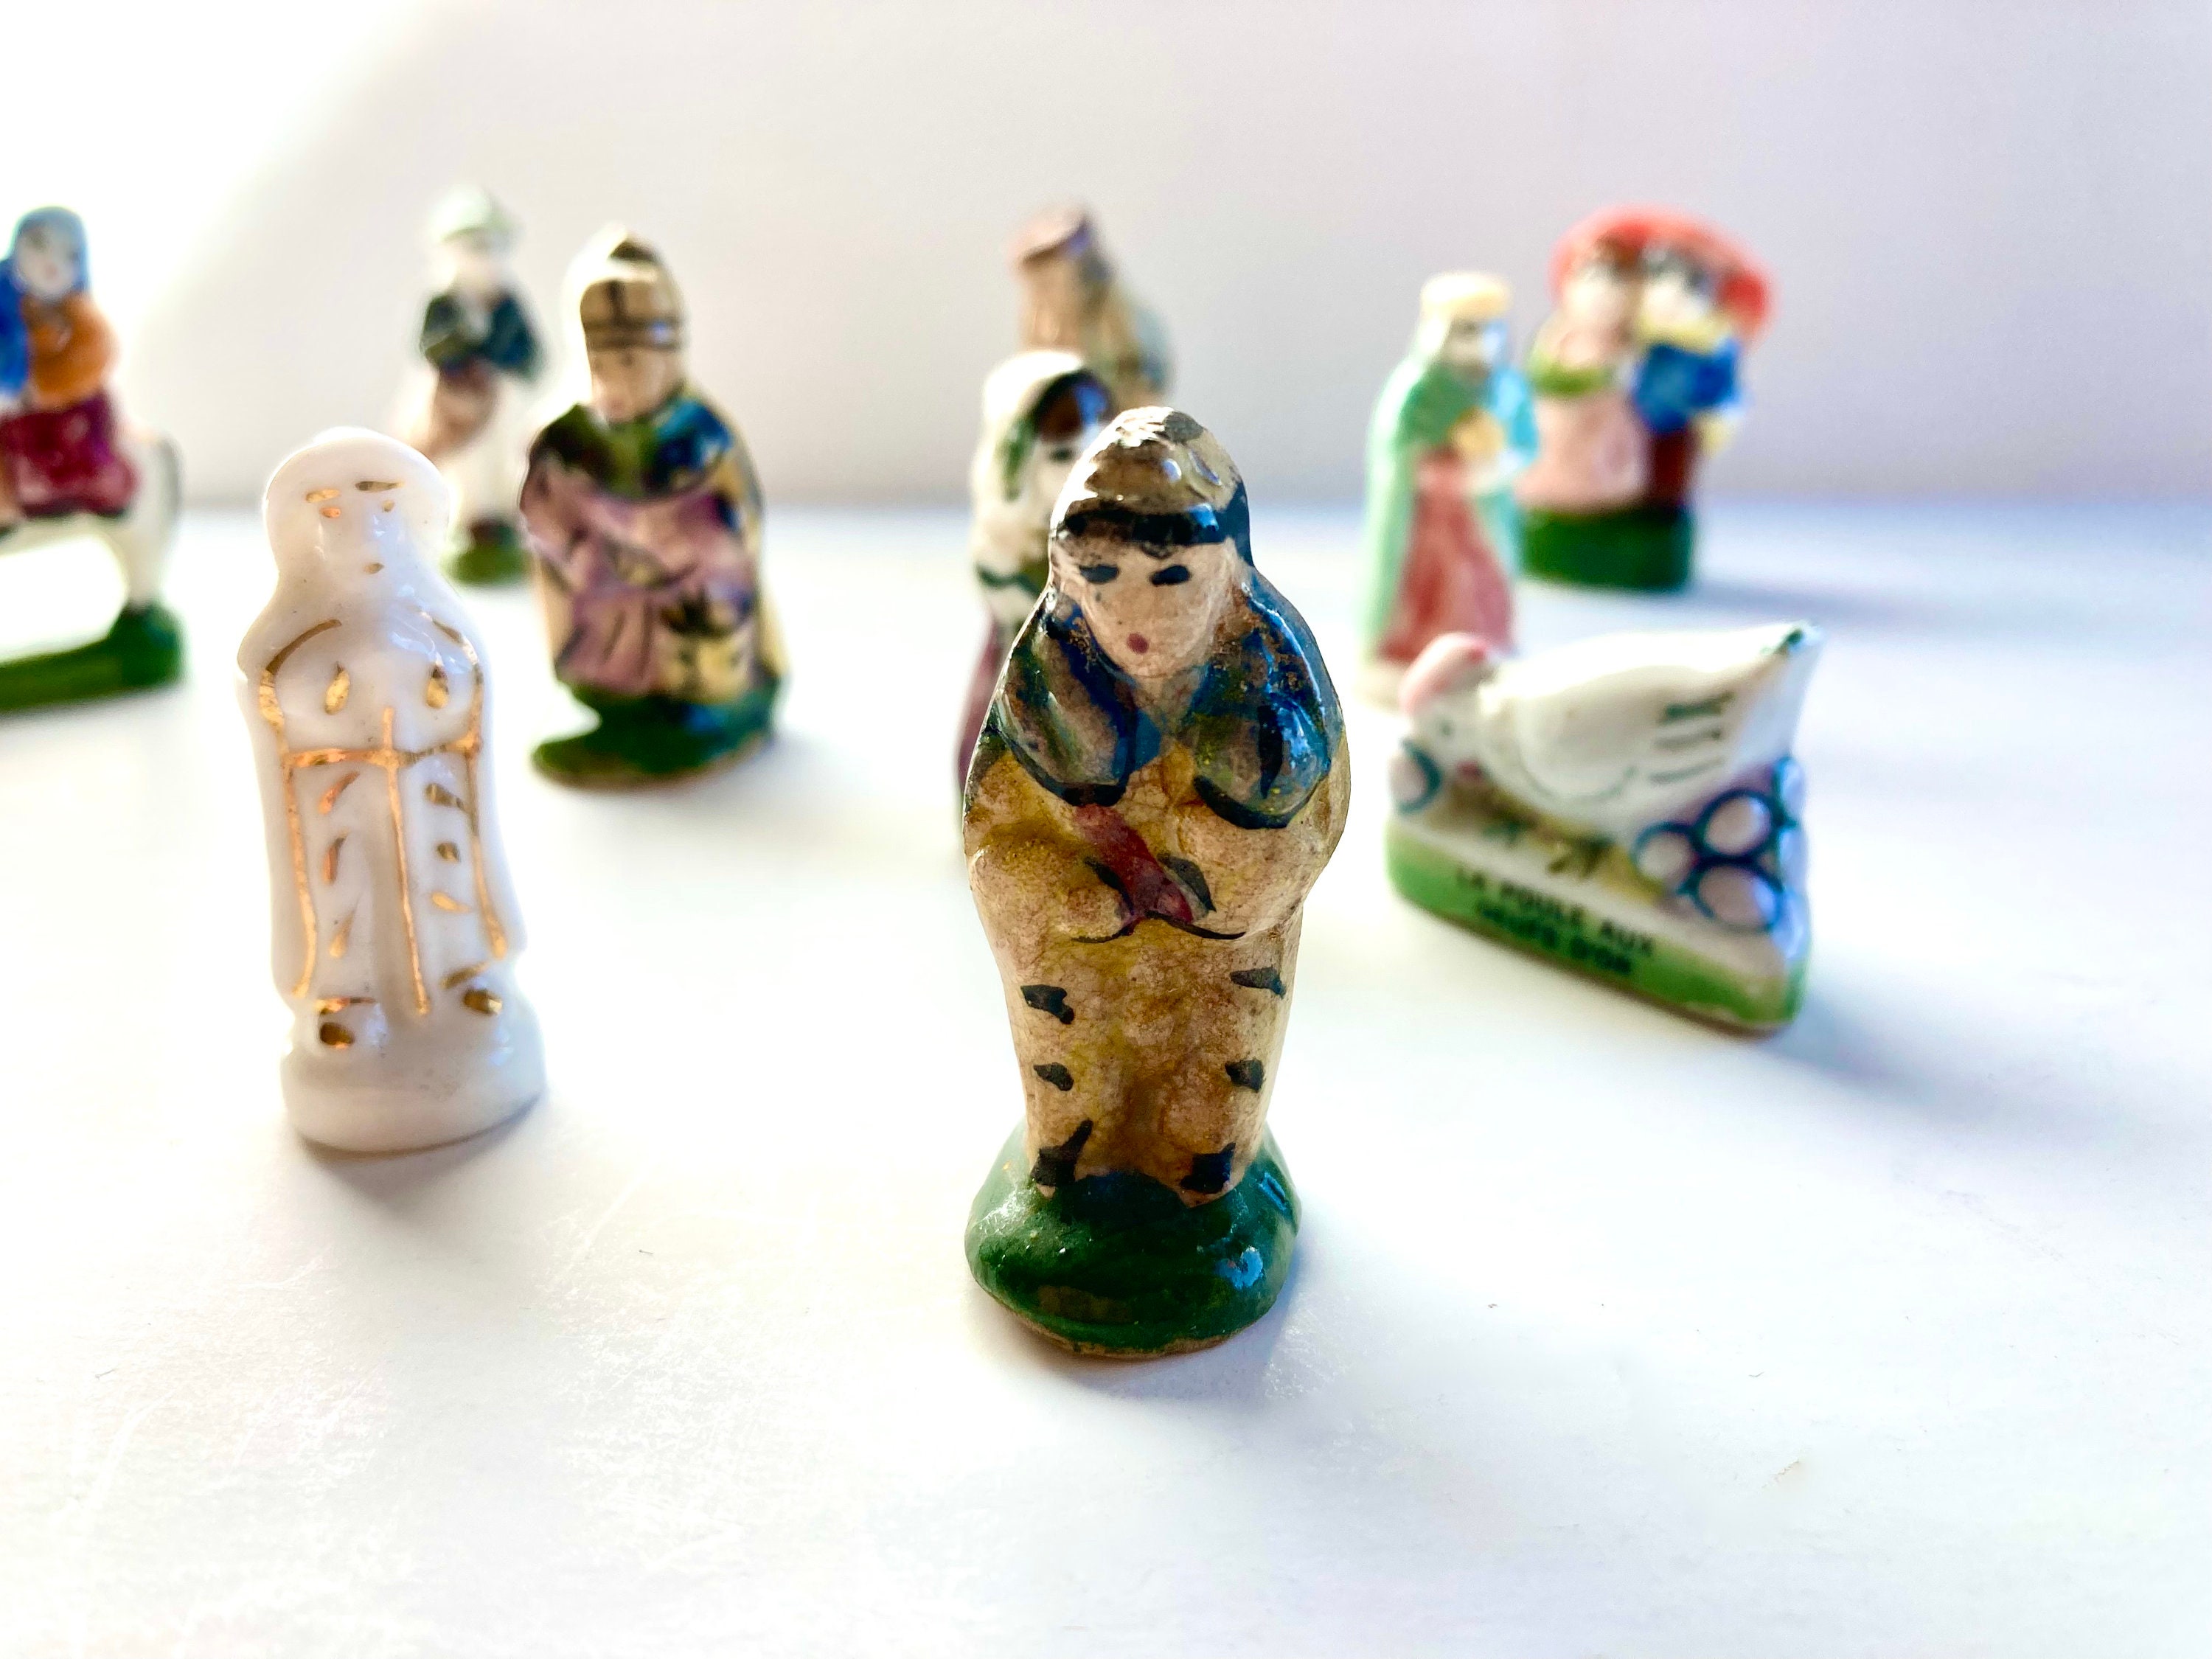 The Weird, Wonderful World of Collecting French Cake Figurines